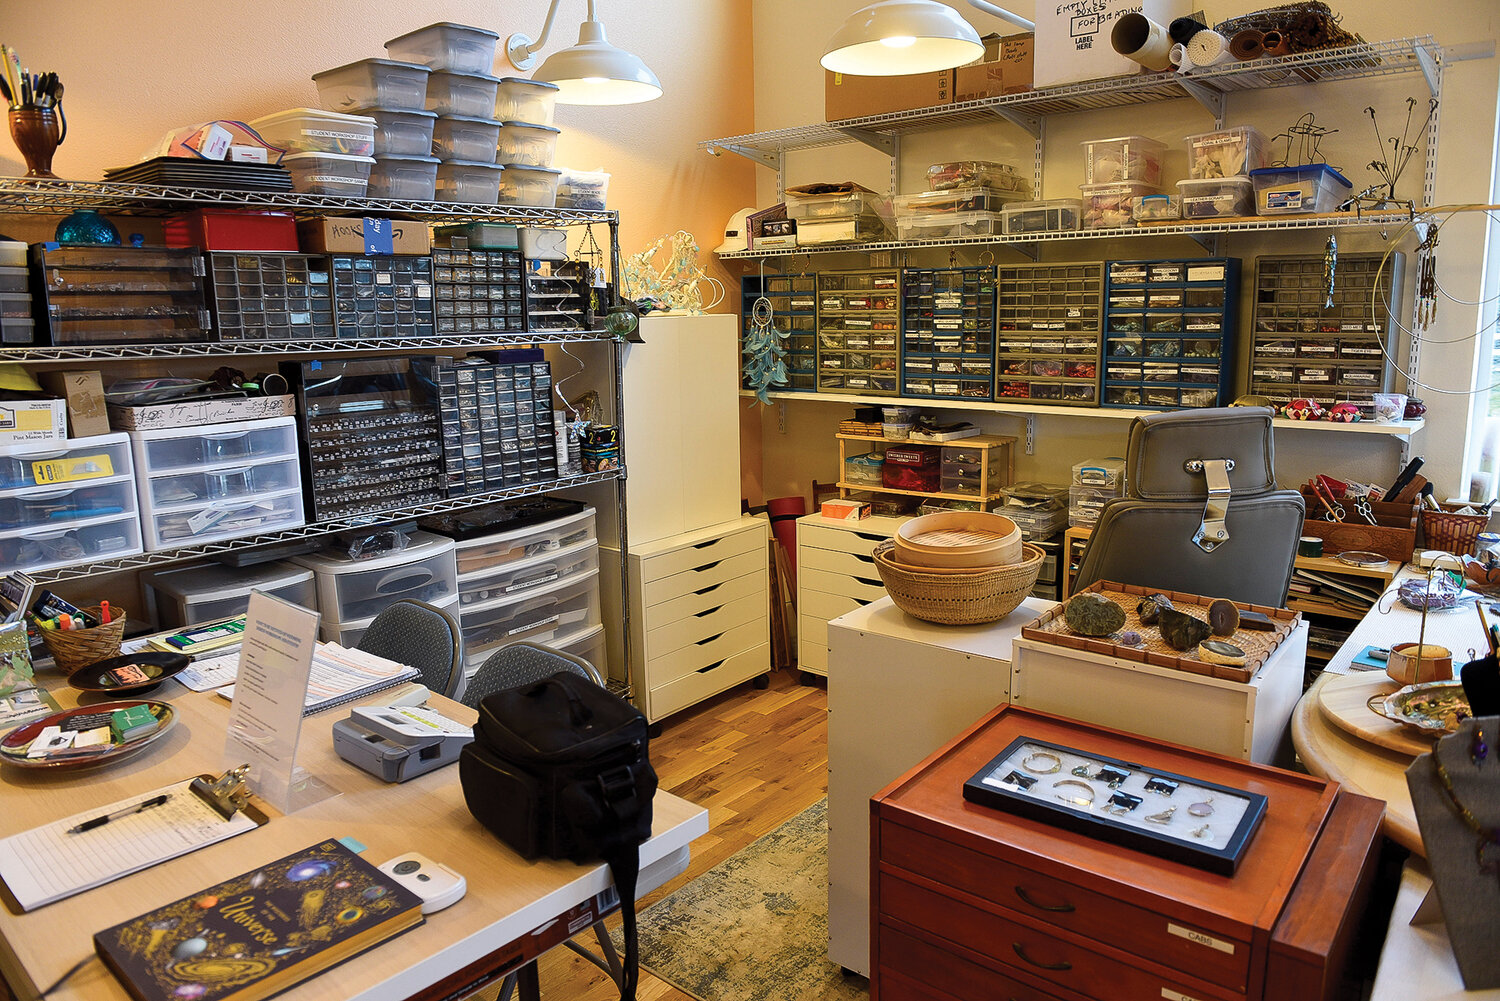 Windsong Design Jewelry art studio, owned by Lois Steiner, is located in Battle Ground.